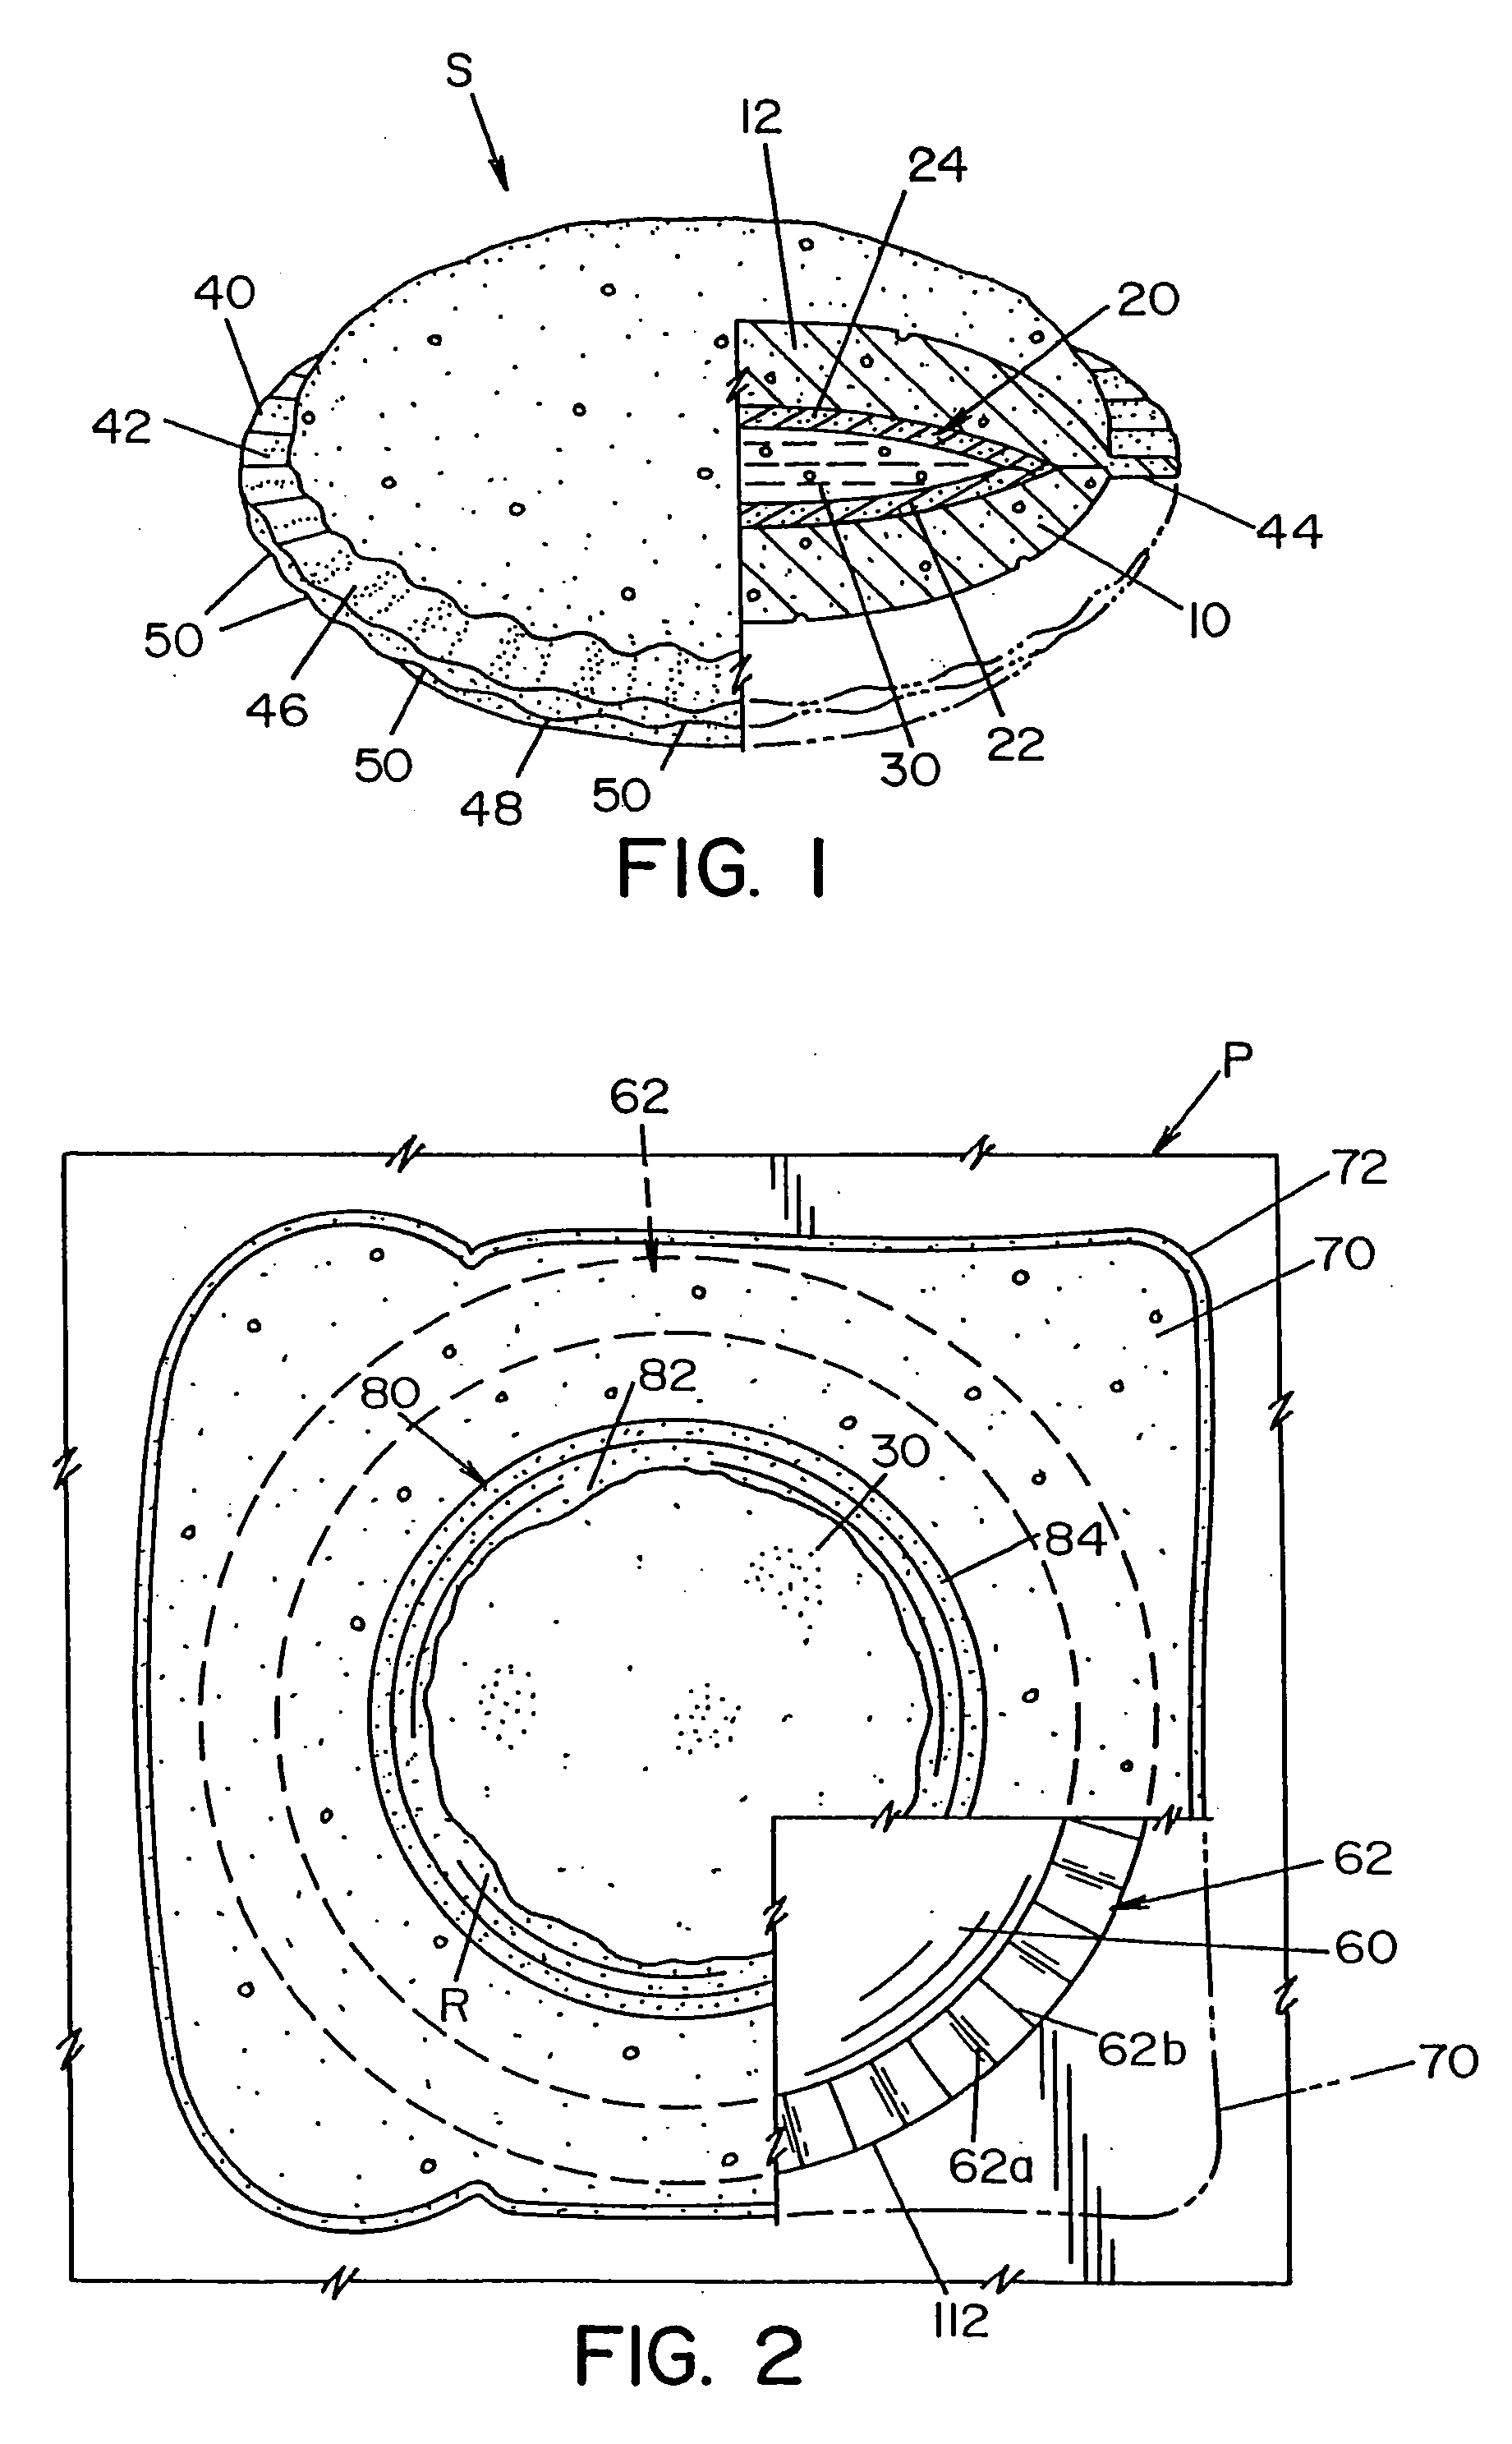 Method and apparatus for making commercial crustless sandwiches and the crustless sandwich made thereby